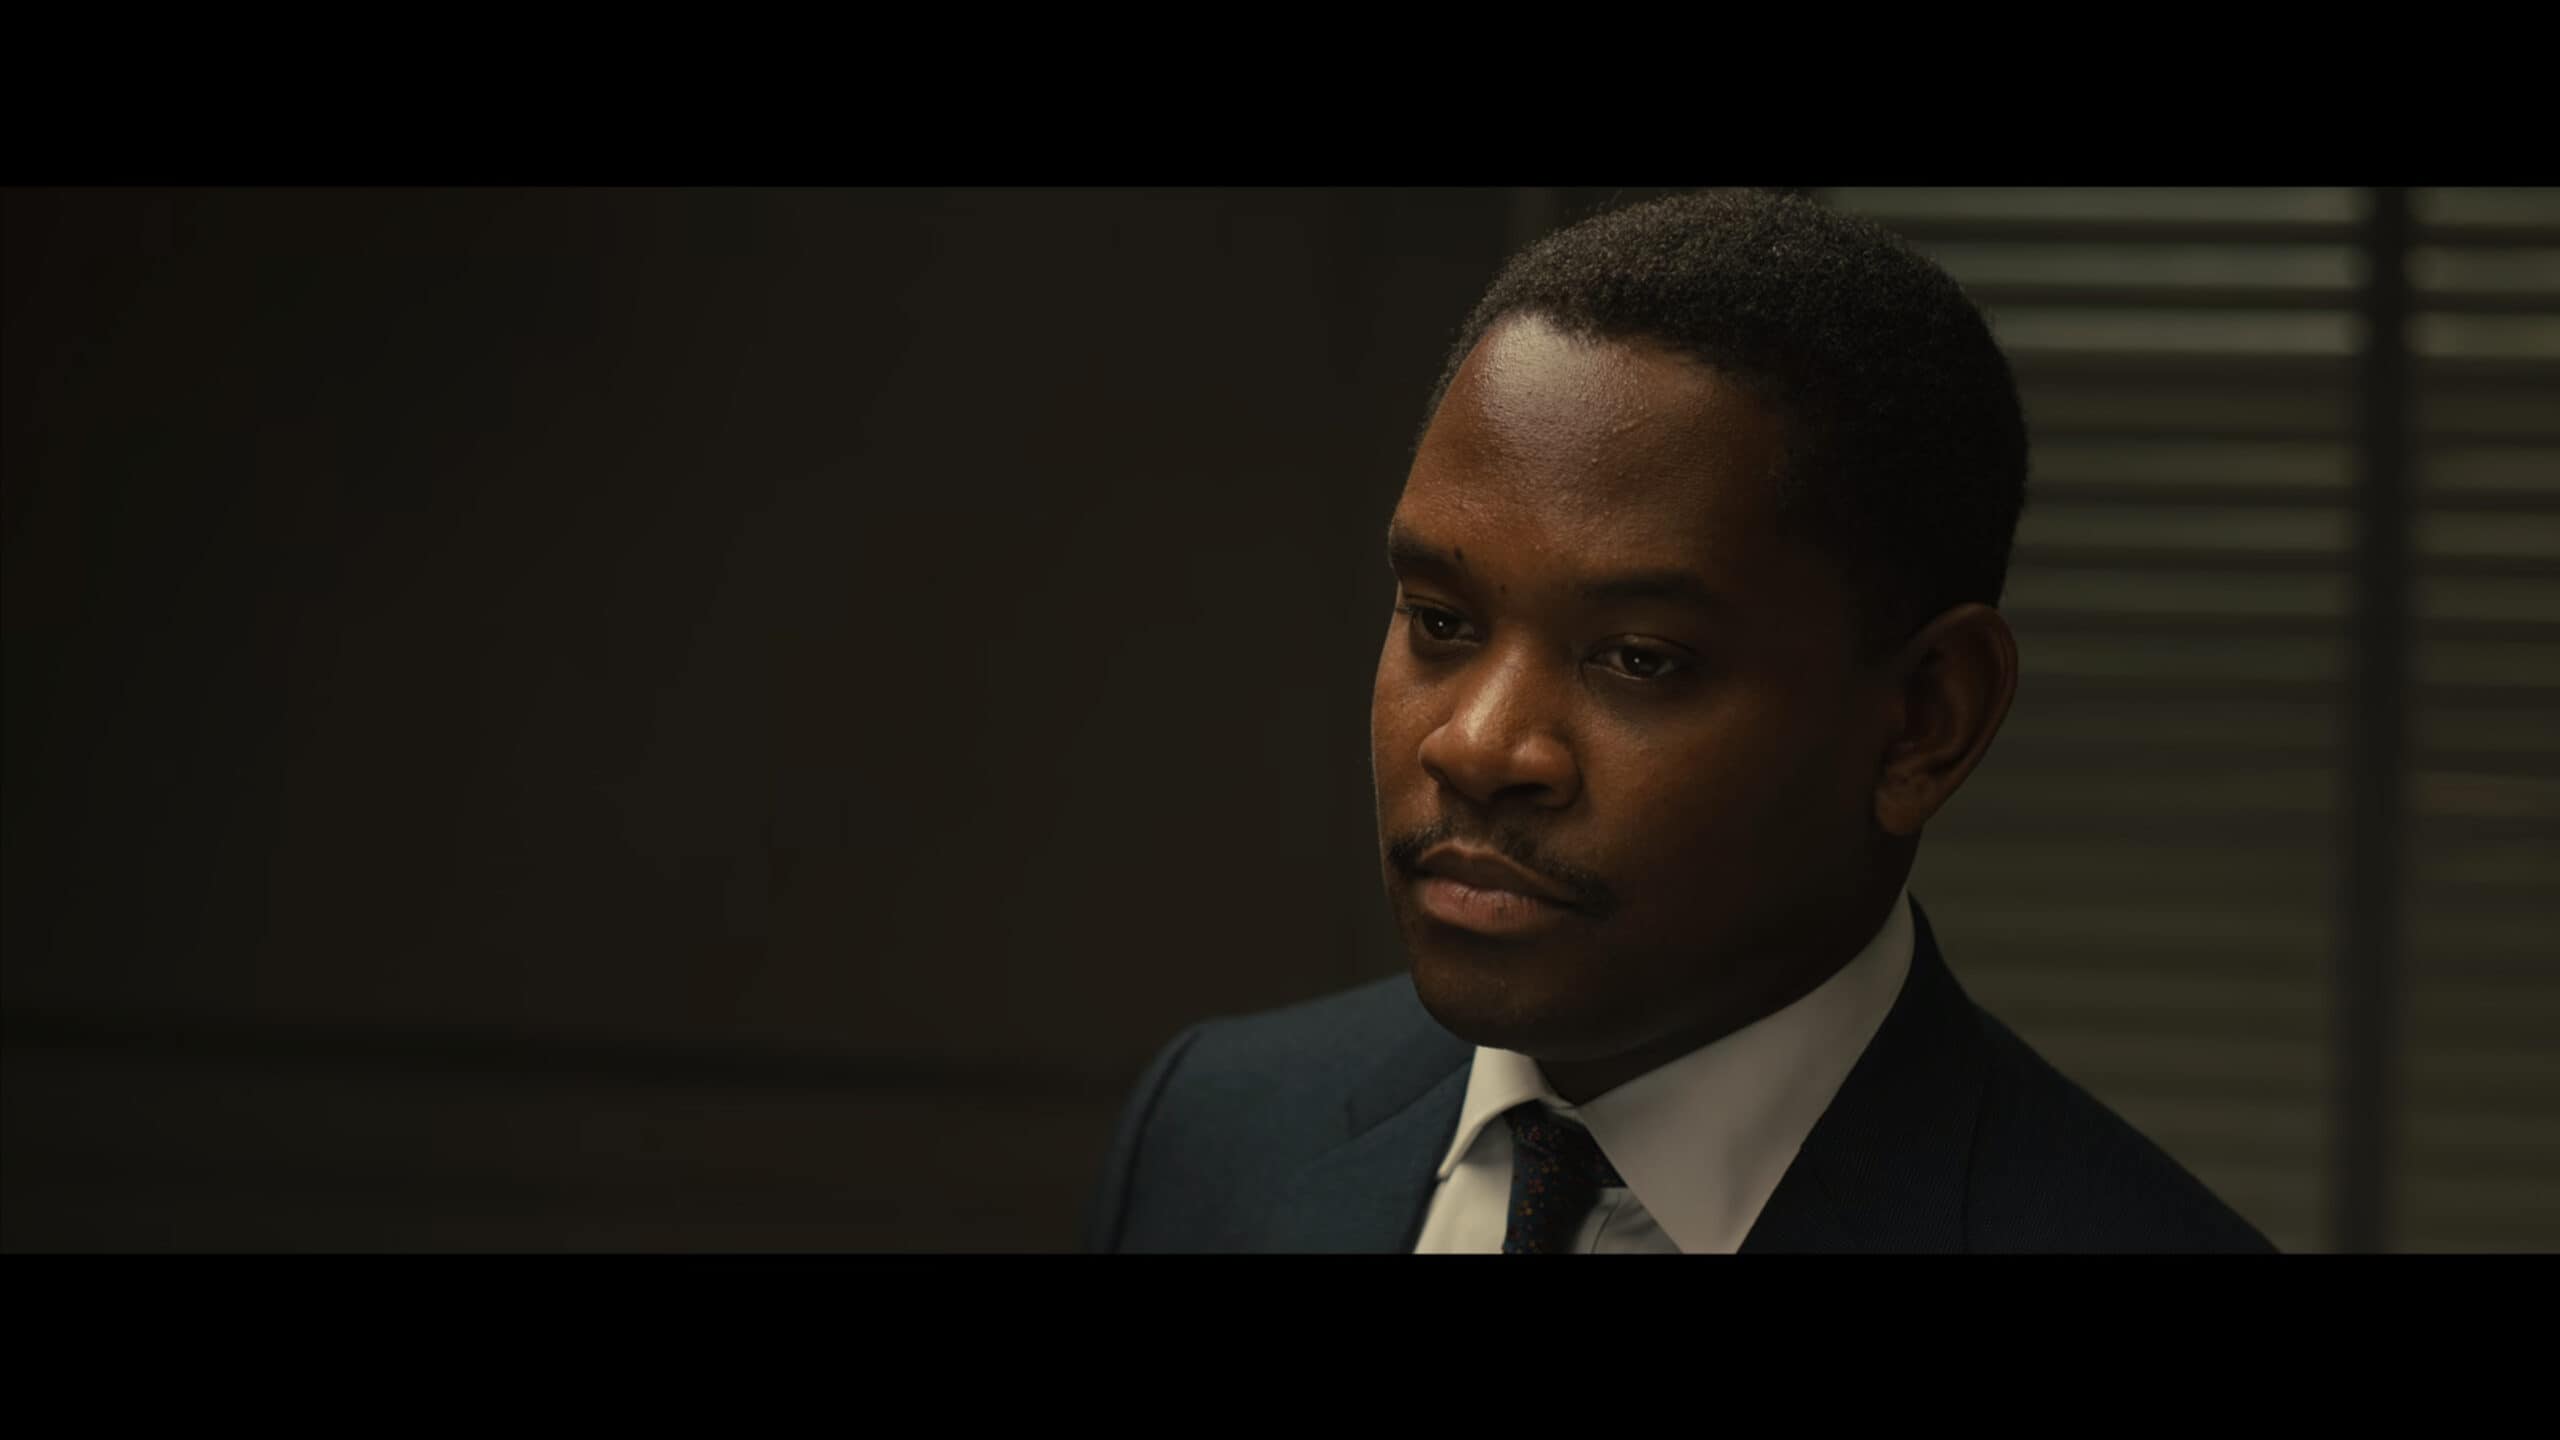 Aml Ameen as Martin Luther King Jr.